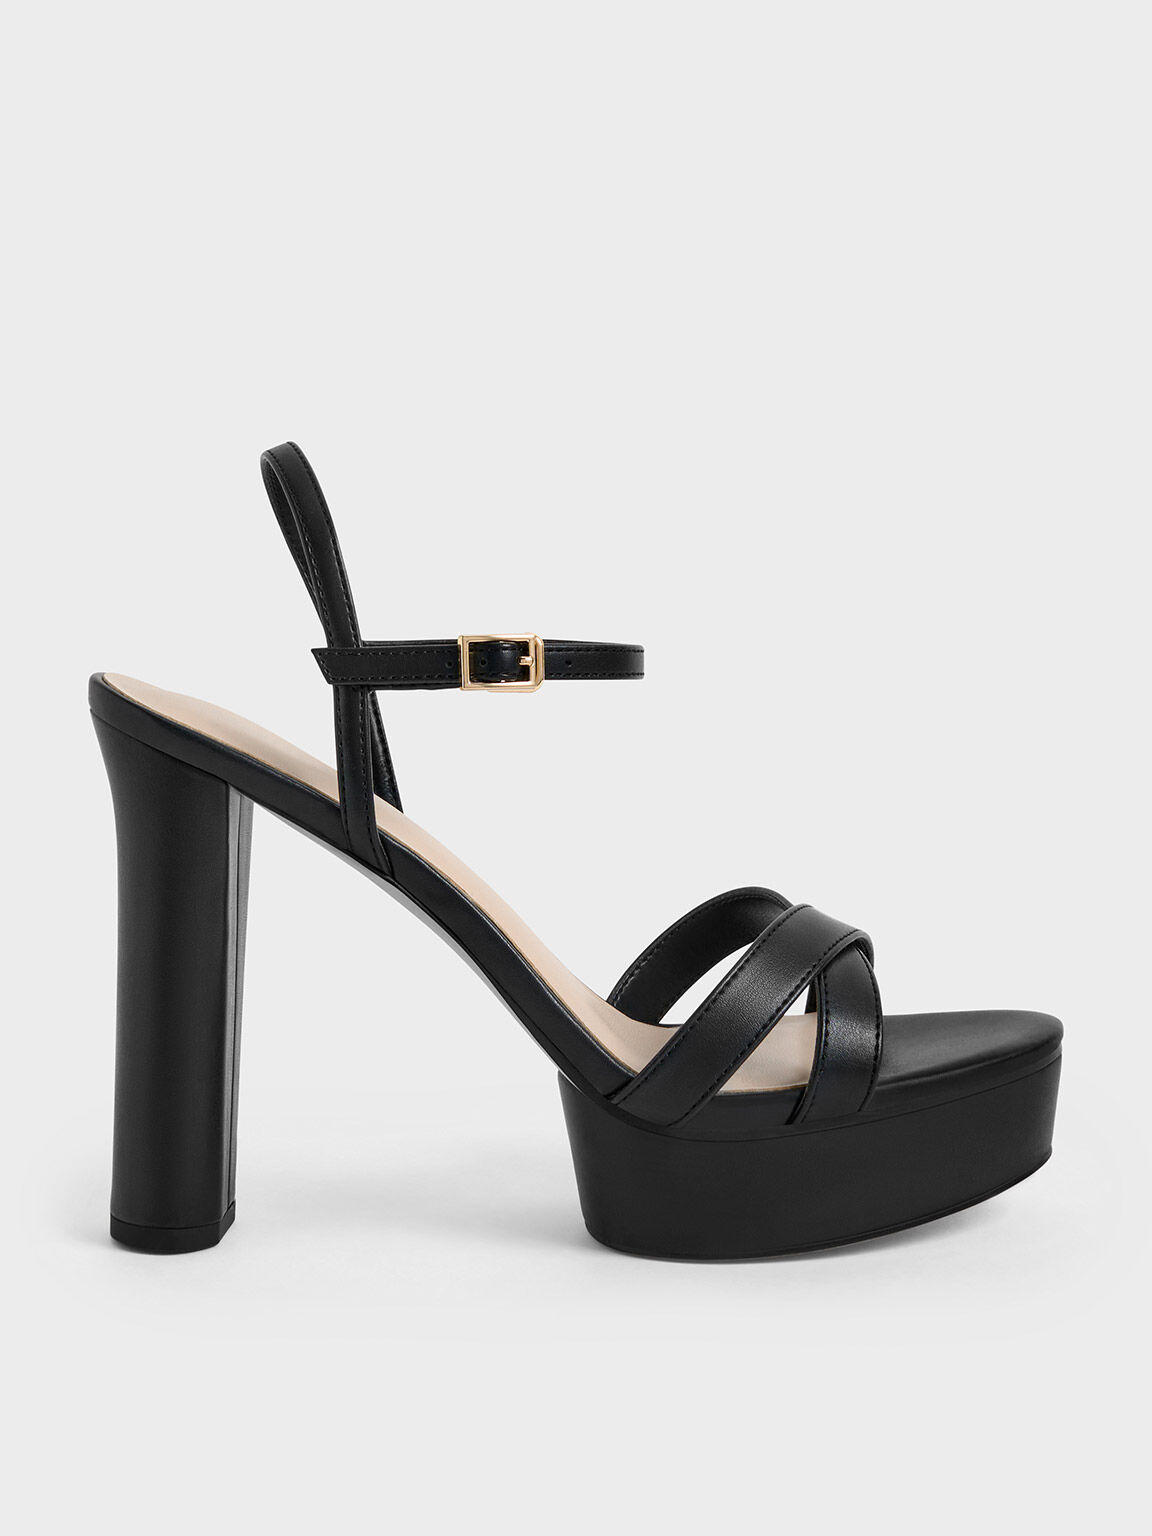 Buy online Black Leather Platforms Sandals from heels for Women by Mochi  for 1989 at 0 off  2023 Limeroadcom